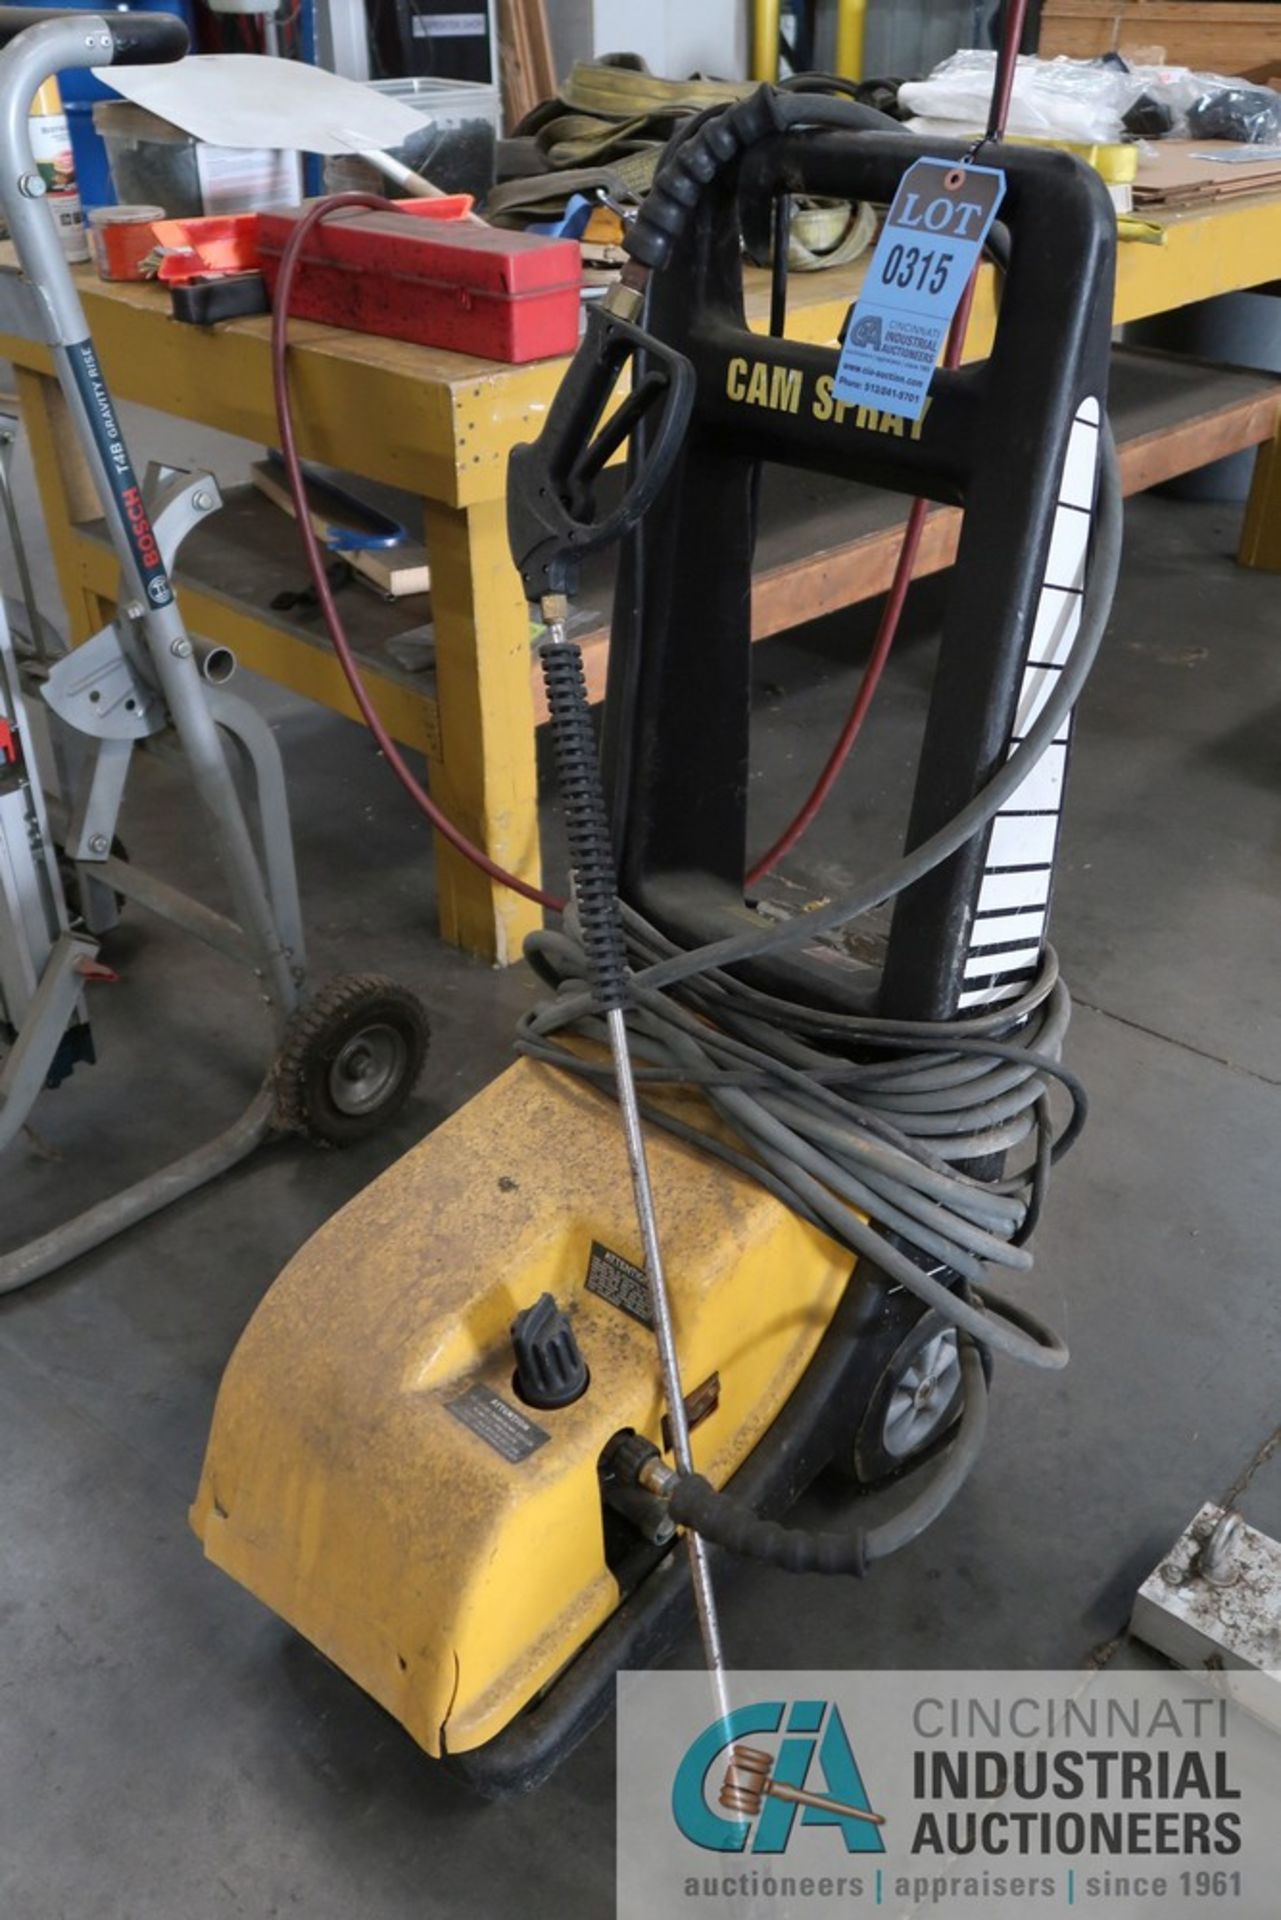 CAM SPRAY PORTABLE ELECTRIC PRESSURE WASHER - Image 2 of 2